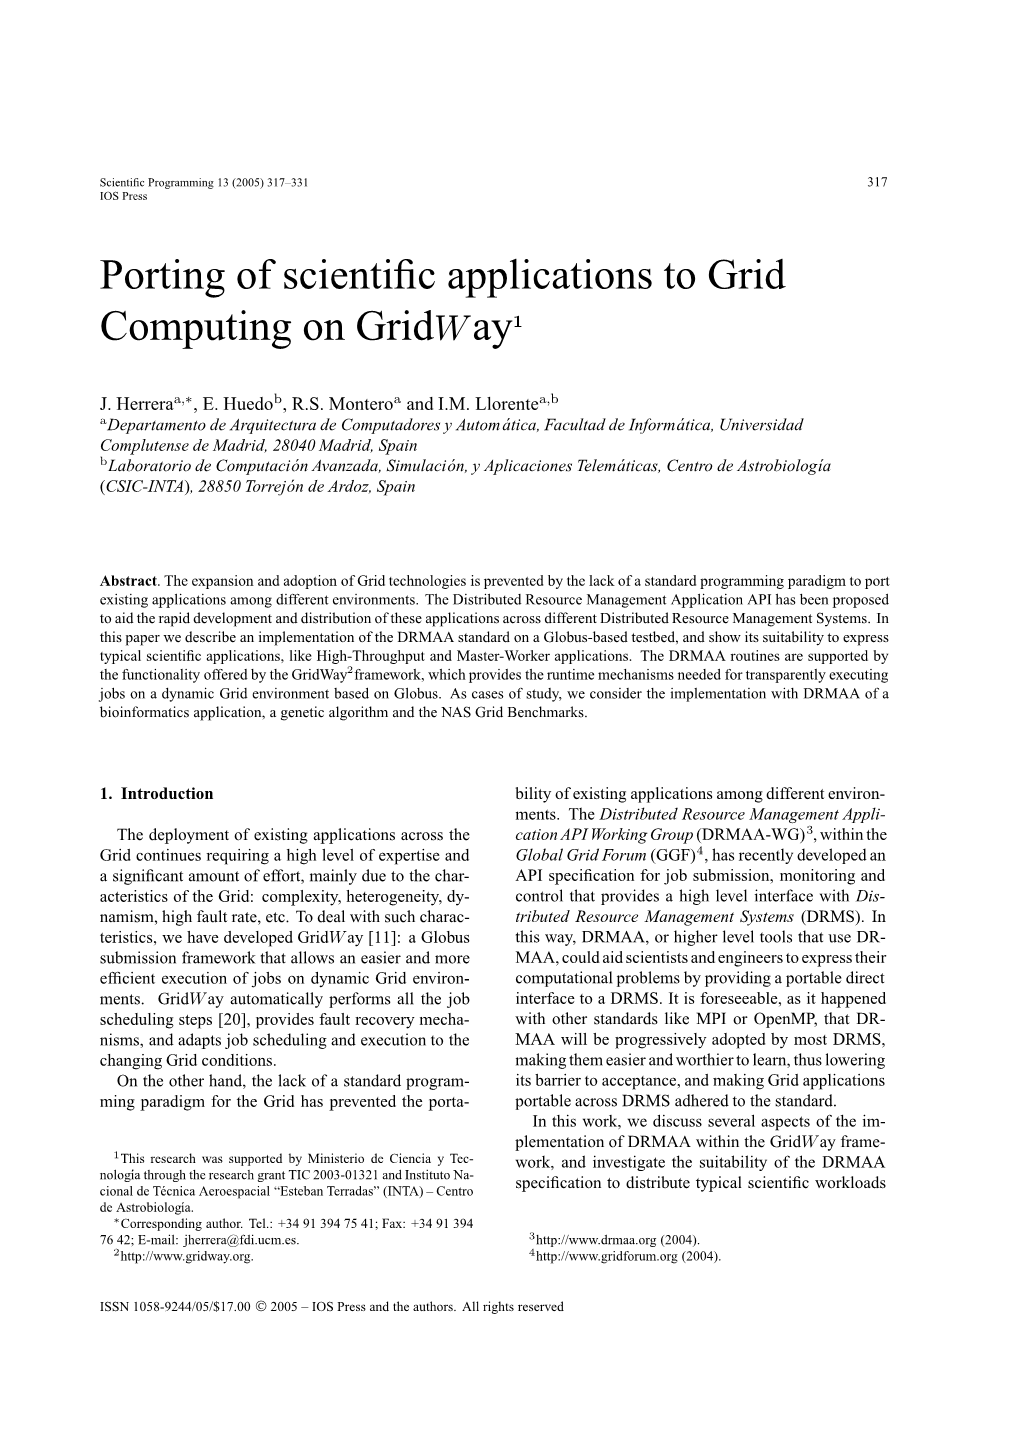 Porting of Scientific Applications to Grid Computing on Gridway1